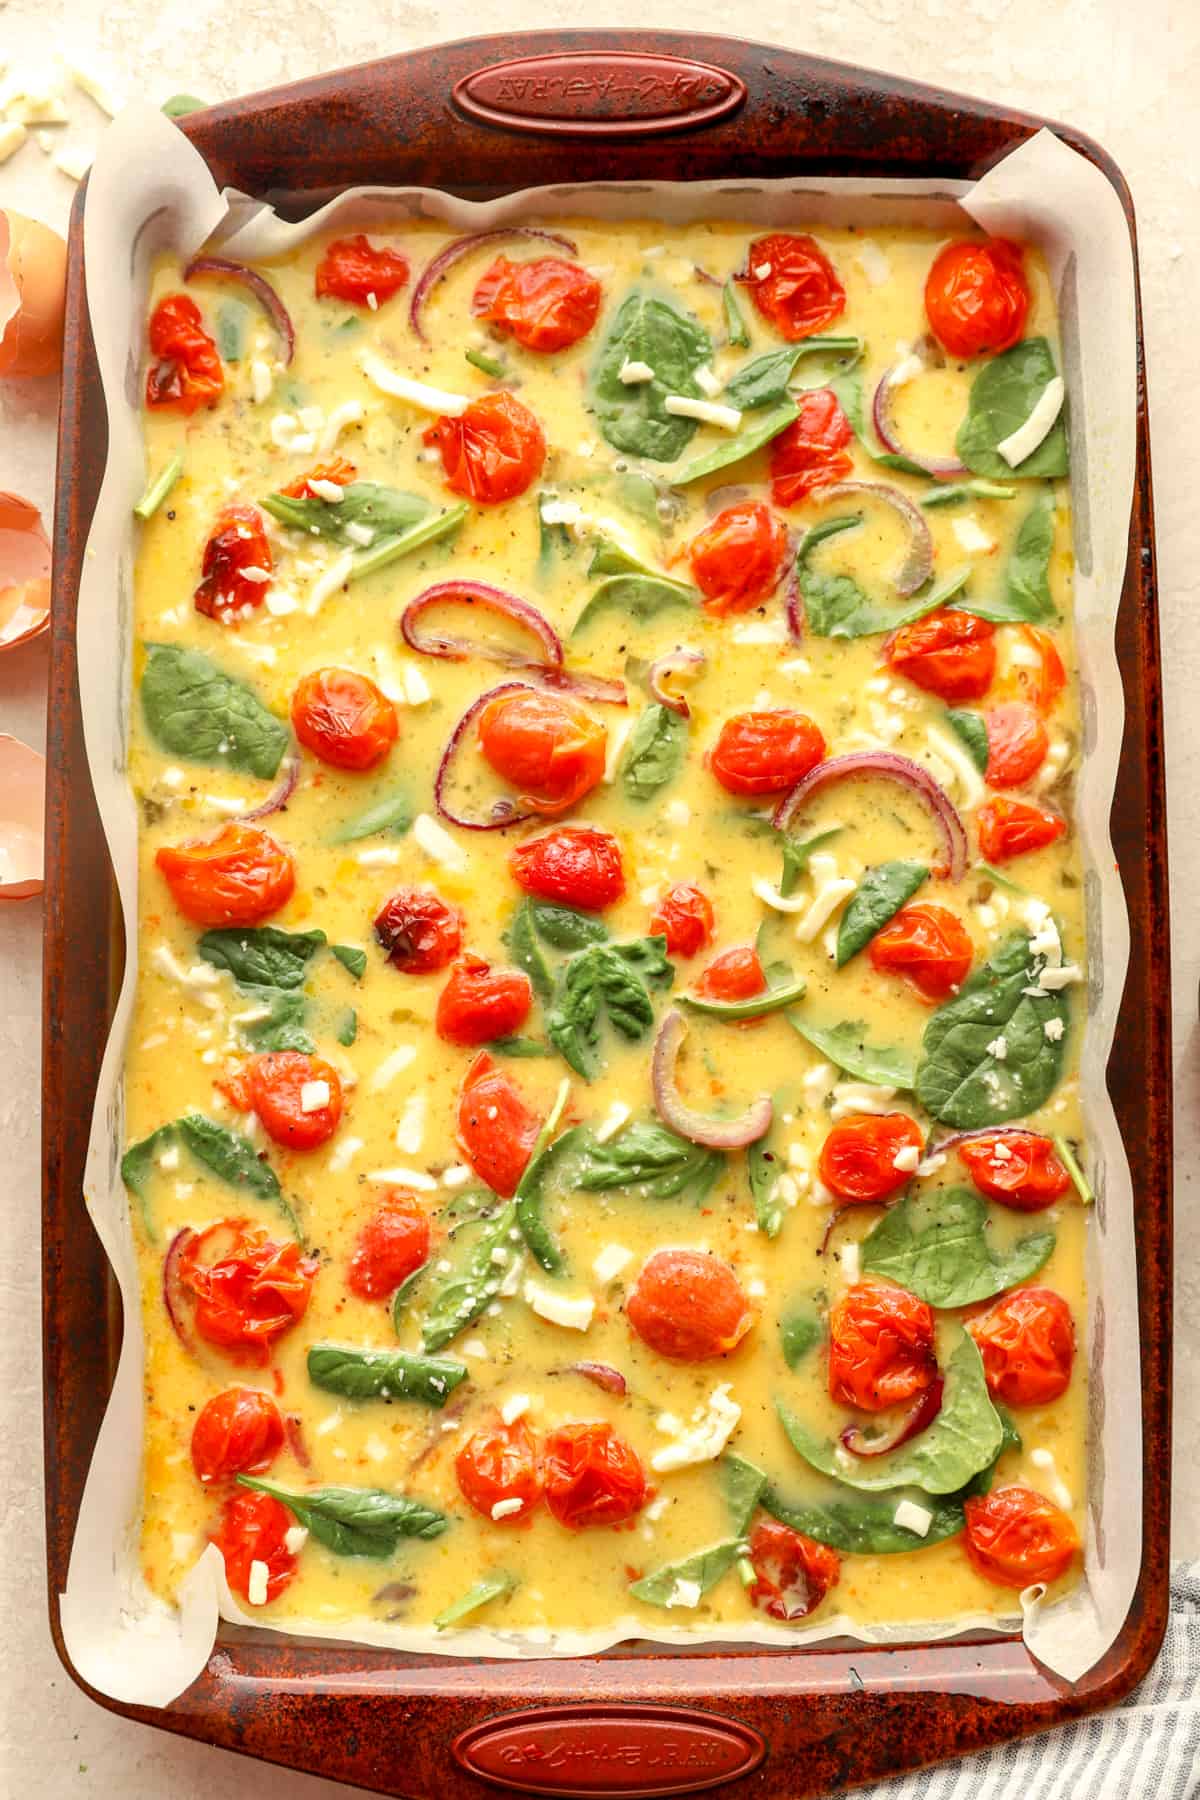 egg with spinach and tomato unbaked in a sheet pan.